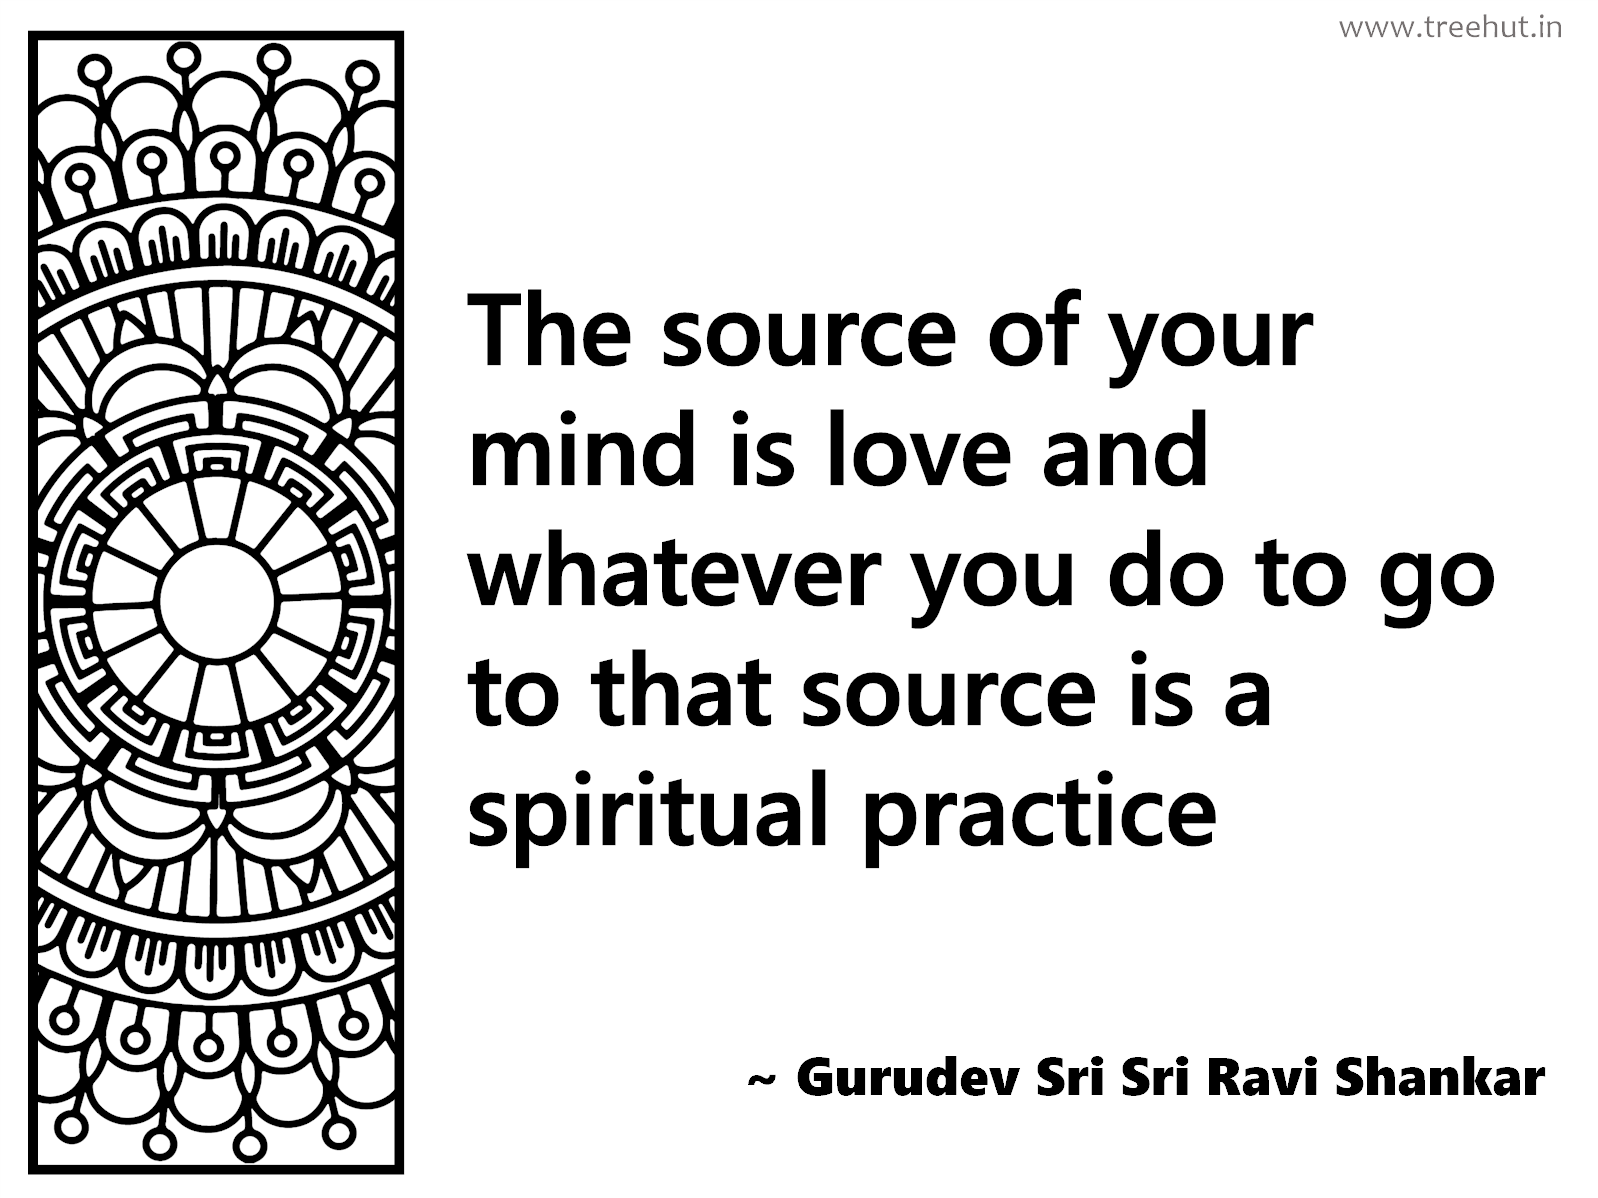 The source of your mind is love and whatever you do to go to that source is a spiritual practice Inspirational Quote by Gurudev Sri Sri Ravi Shankar, coloring pages